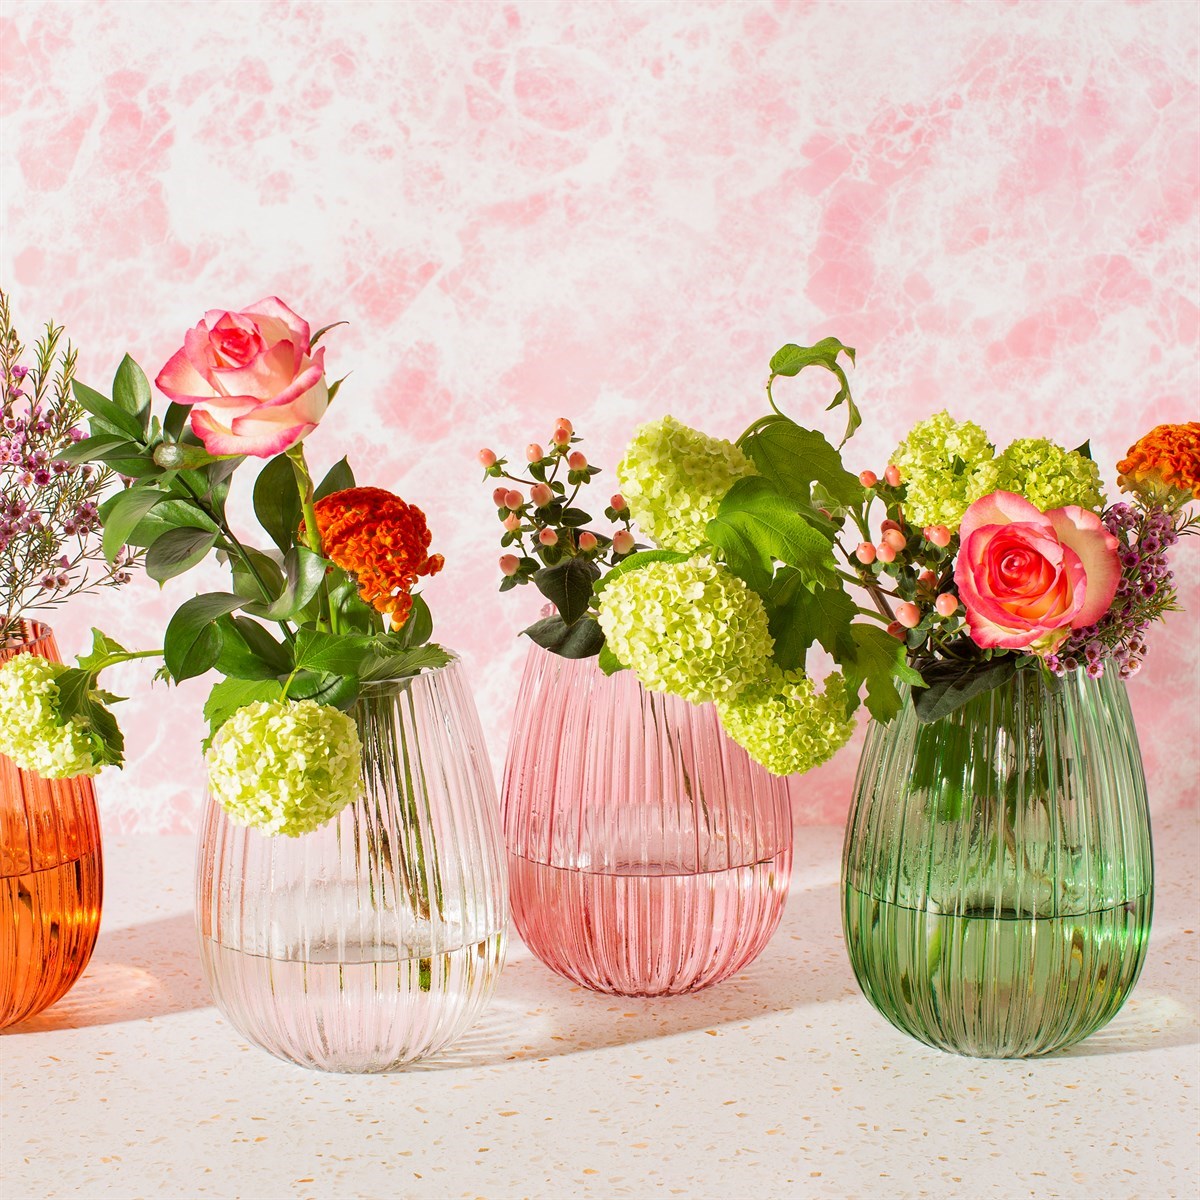 Flora Tall Fluted Ribbed Glass Vase | Pink